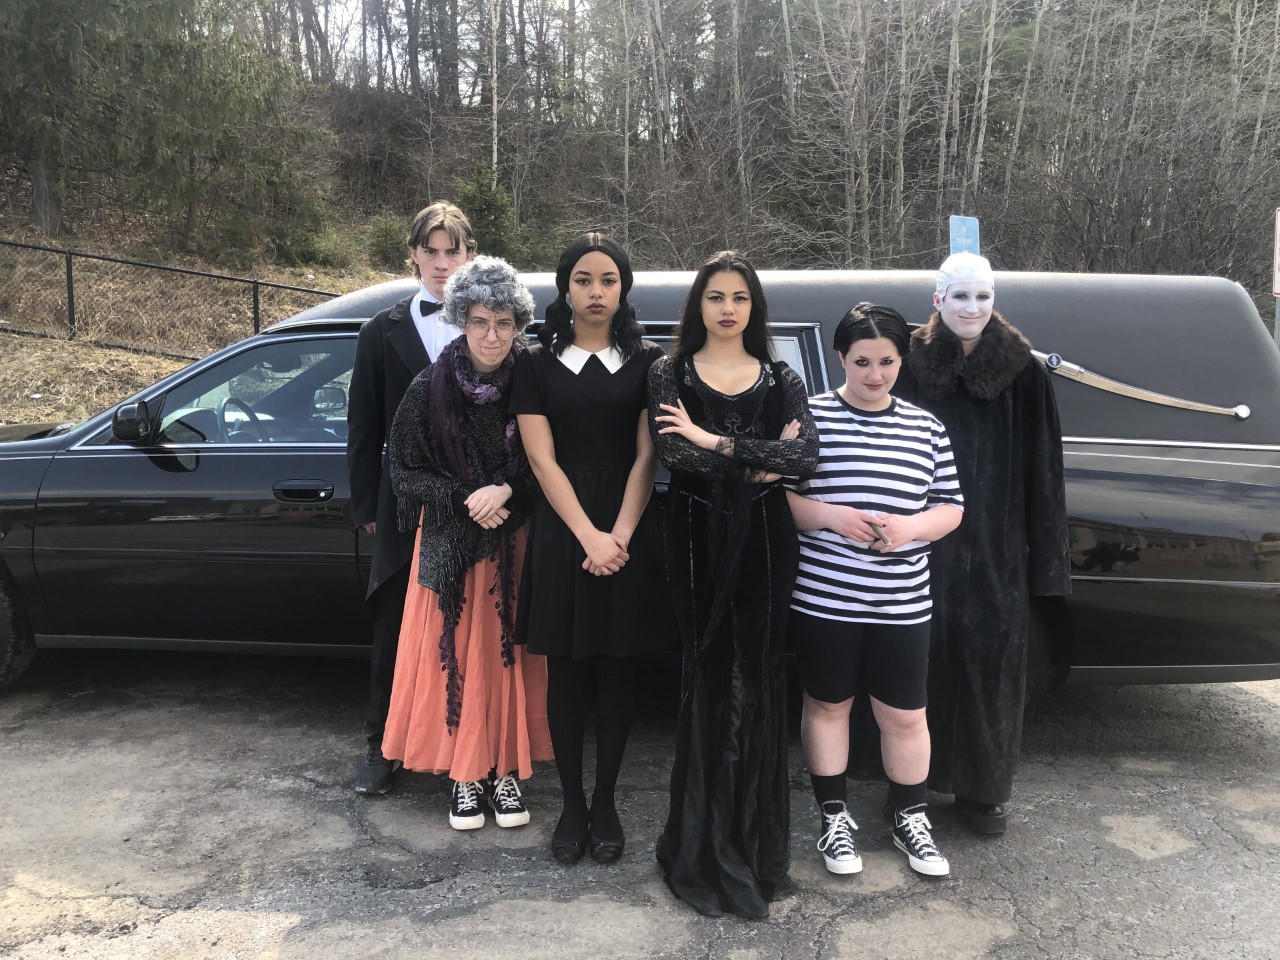 This is a photo of the lead cast members in The Addams Family, all dressed in costume and standing in front of a black car.